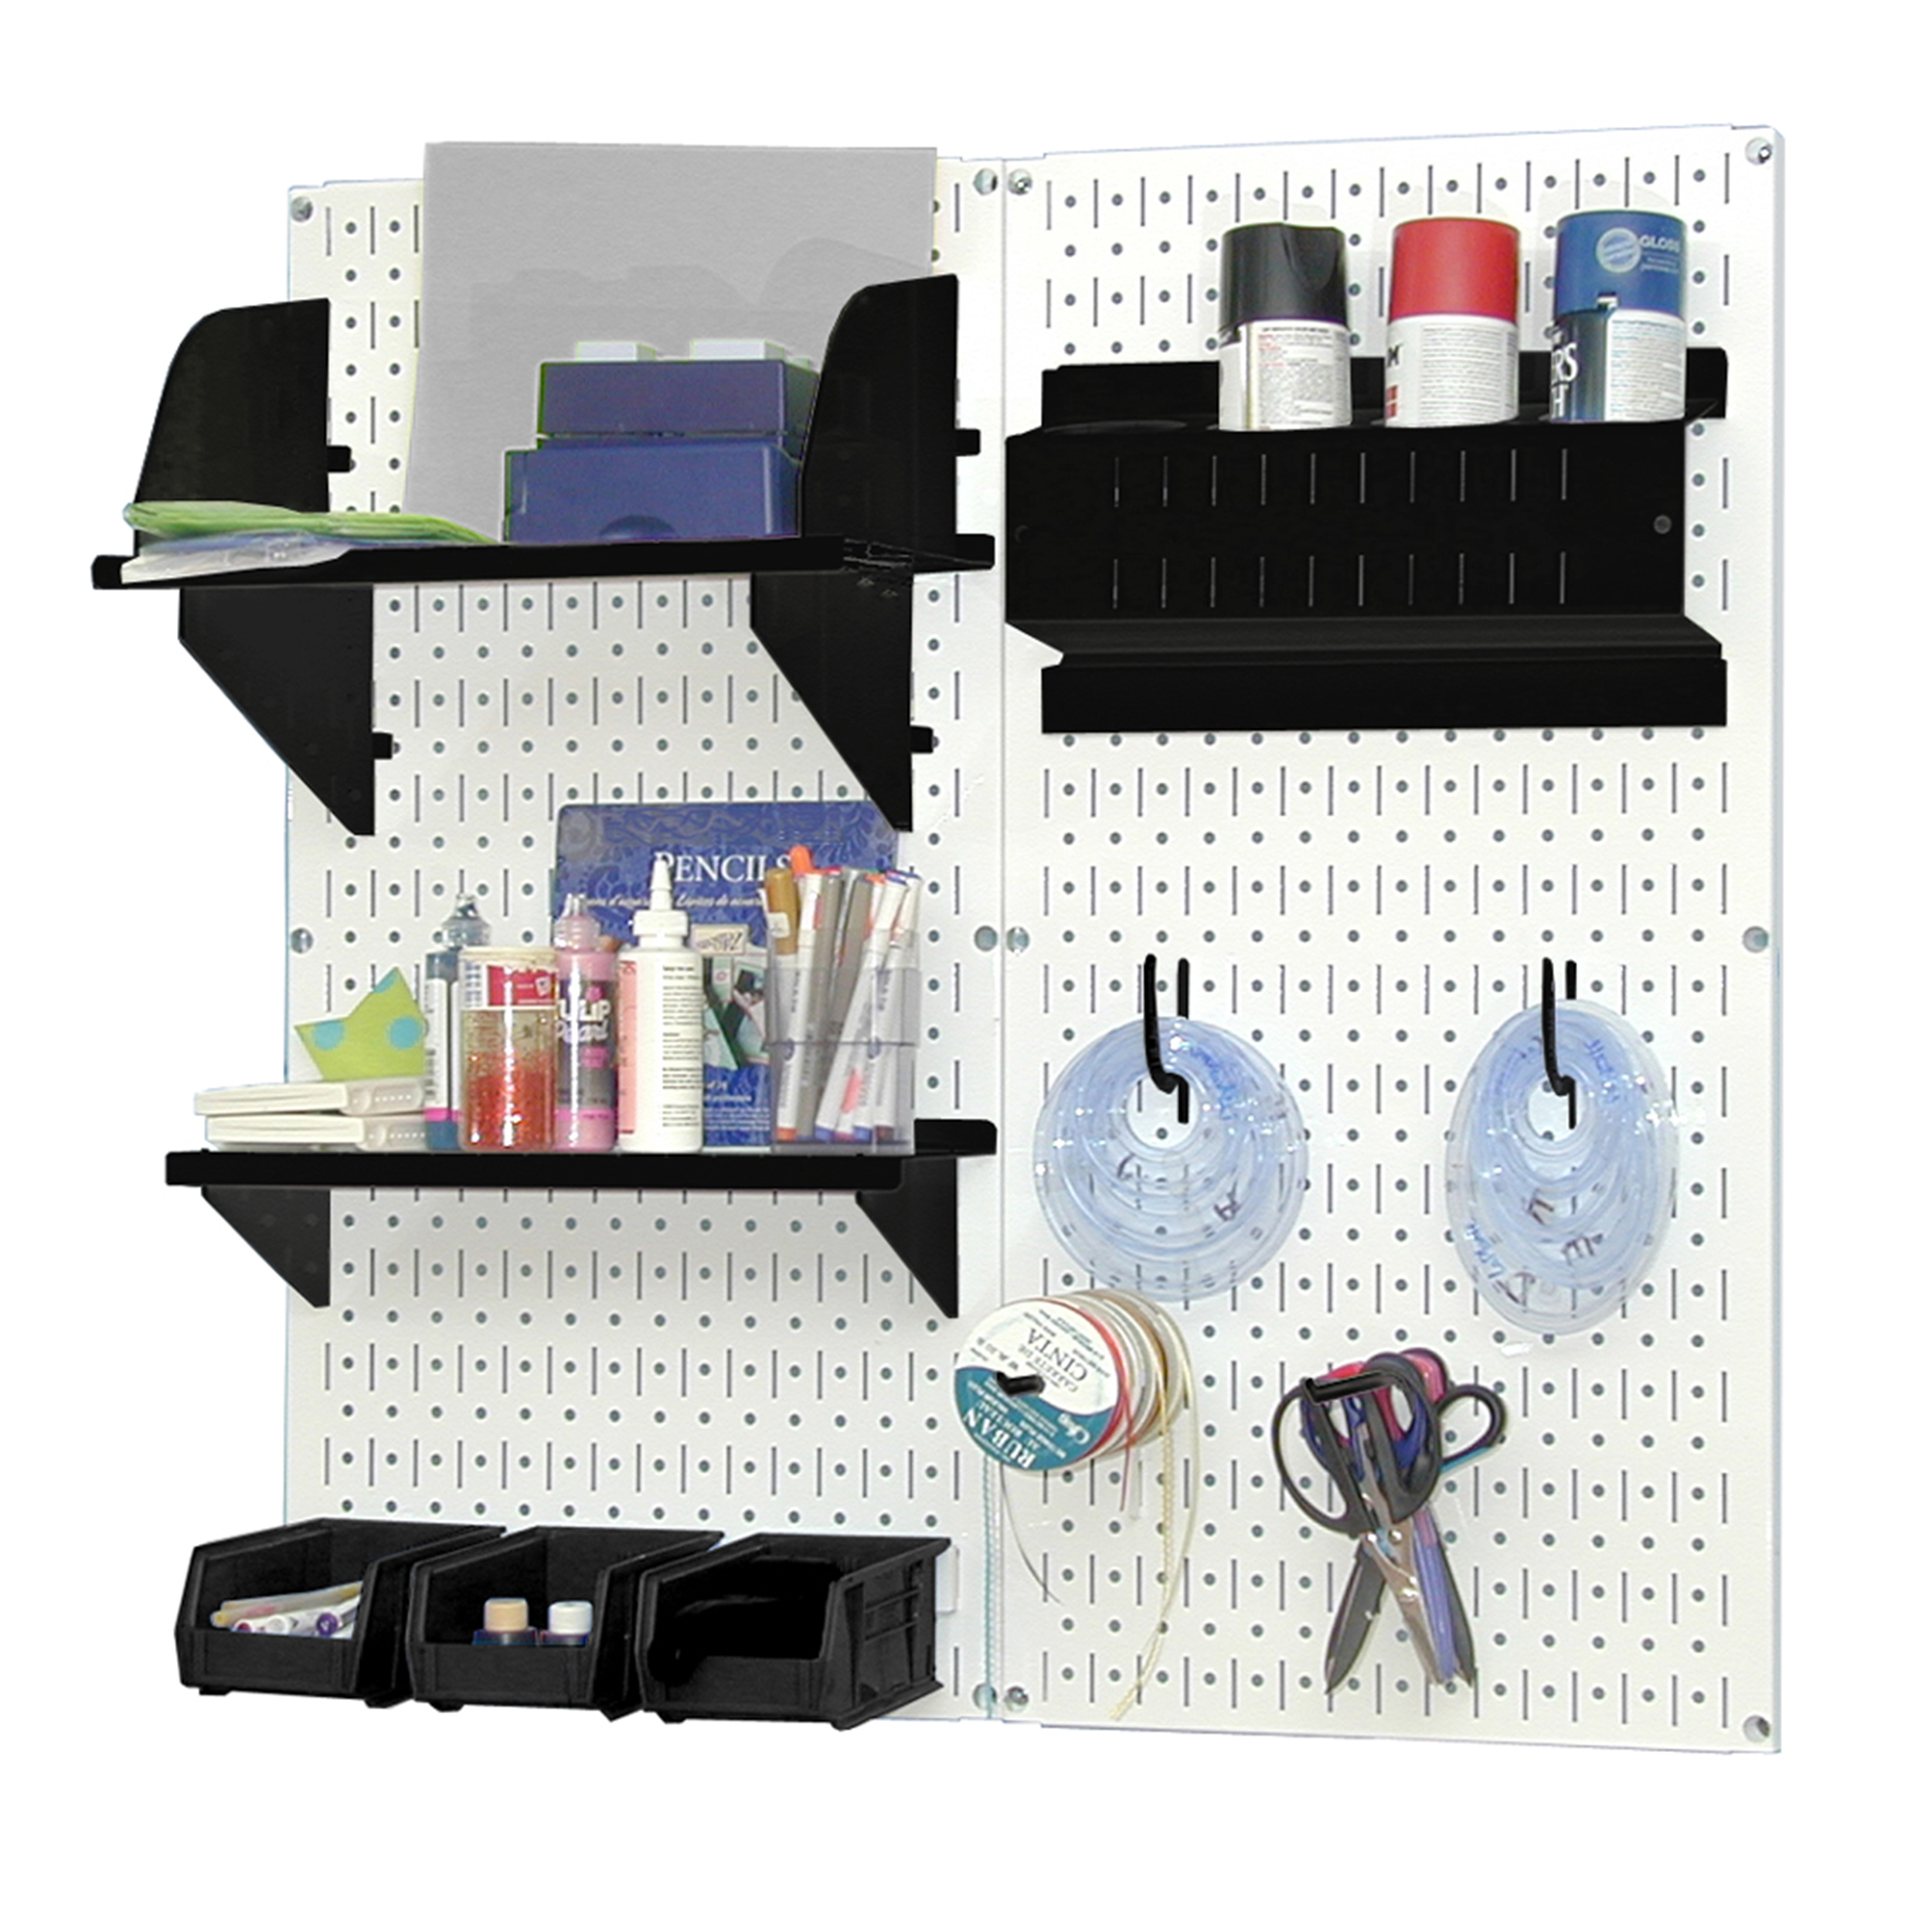 Pegboard Hobby Craft Pegboard Organizer Storage Kit With White Pegboard And Black Accessories